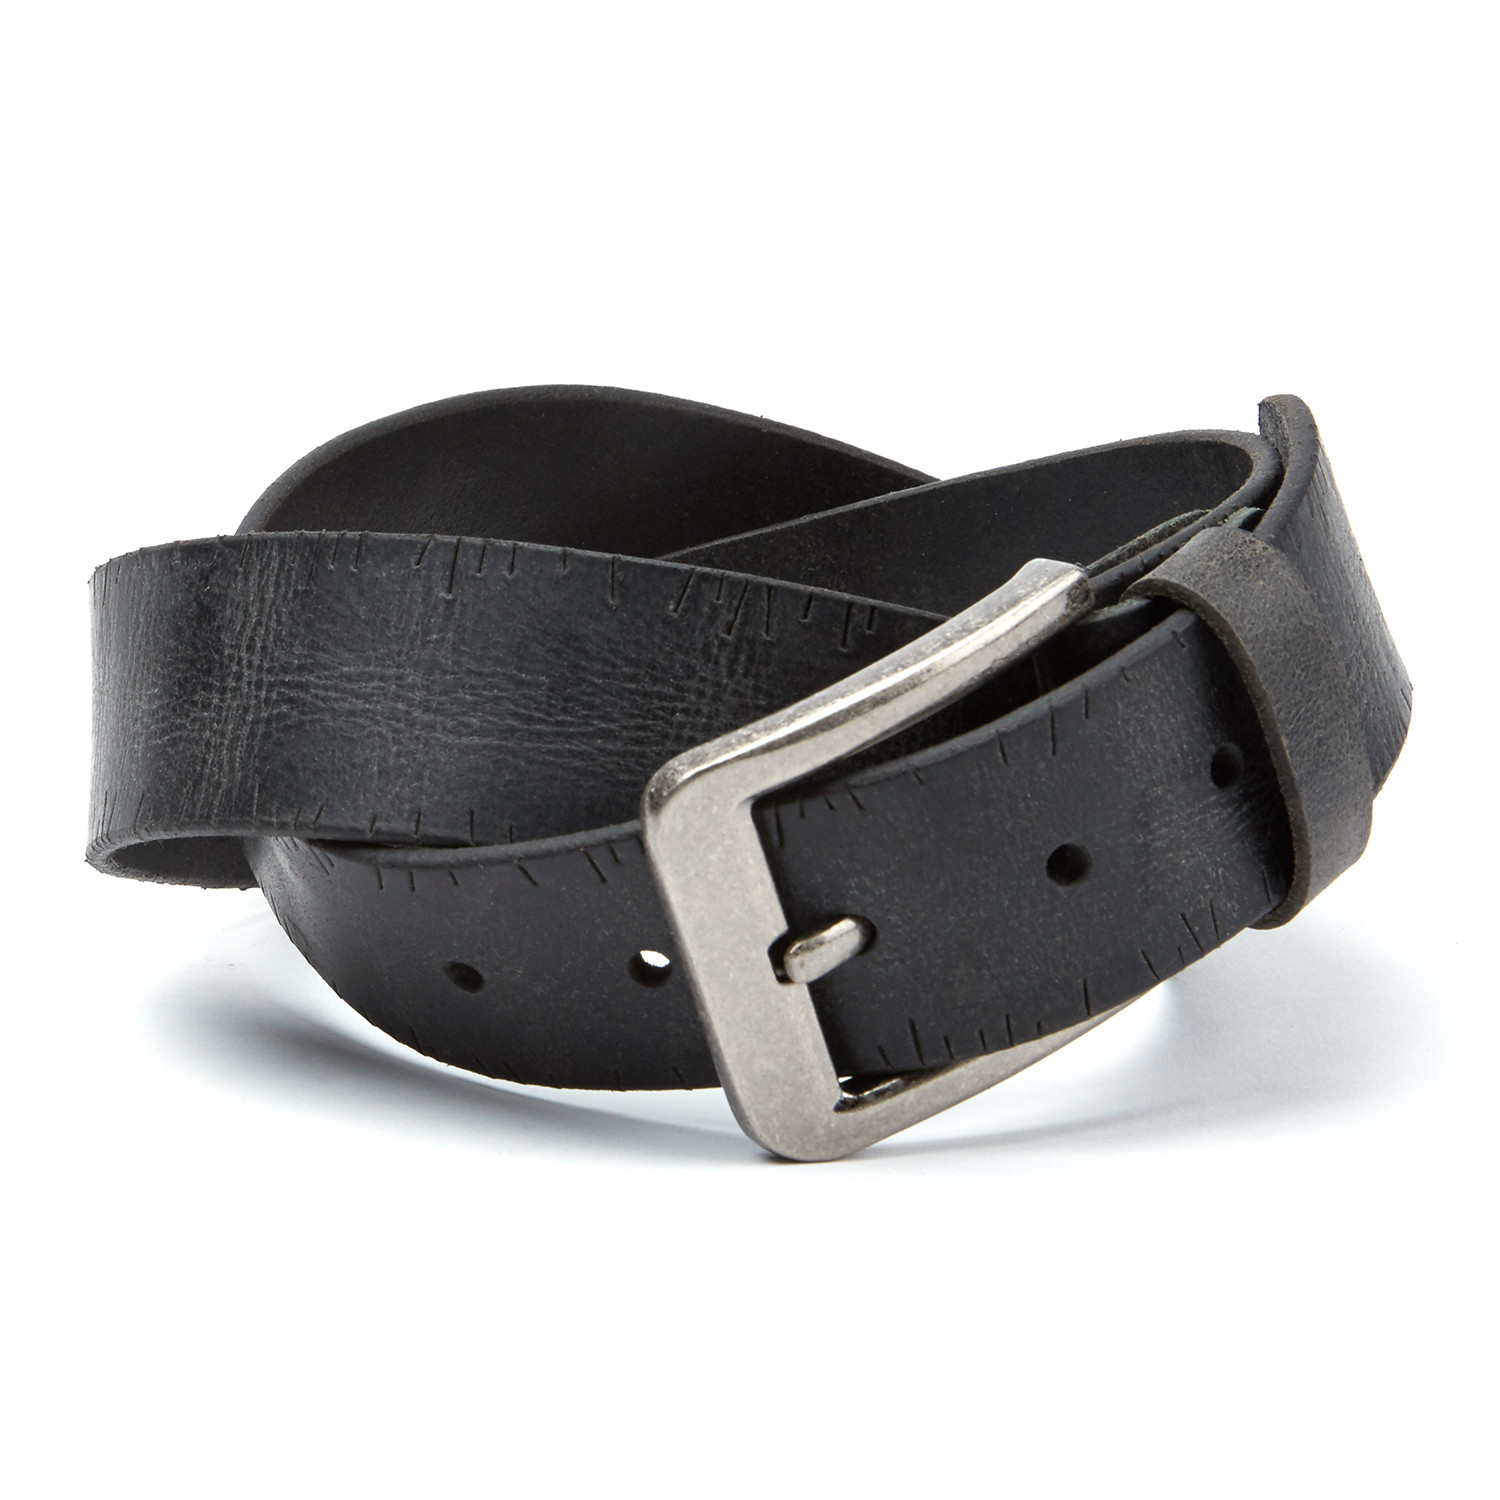 Souled Out // The Prince Belt // Black (S: 30-32 Waist) - Rugged ...